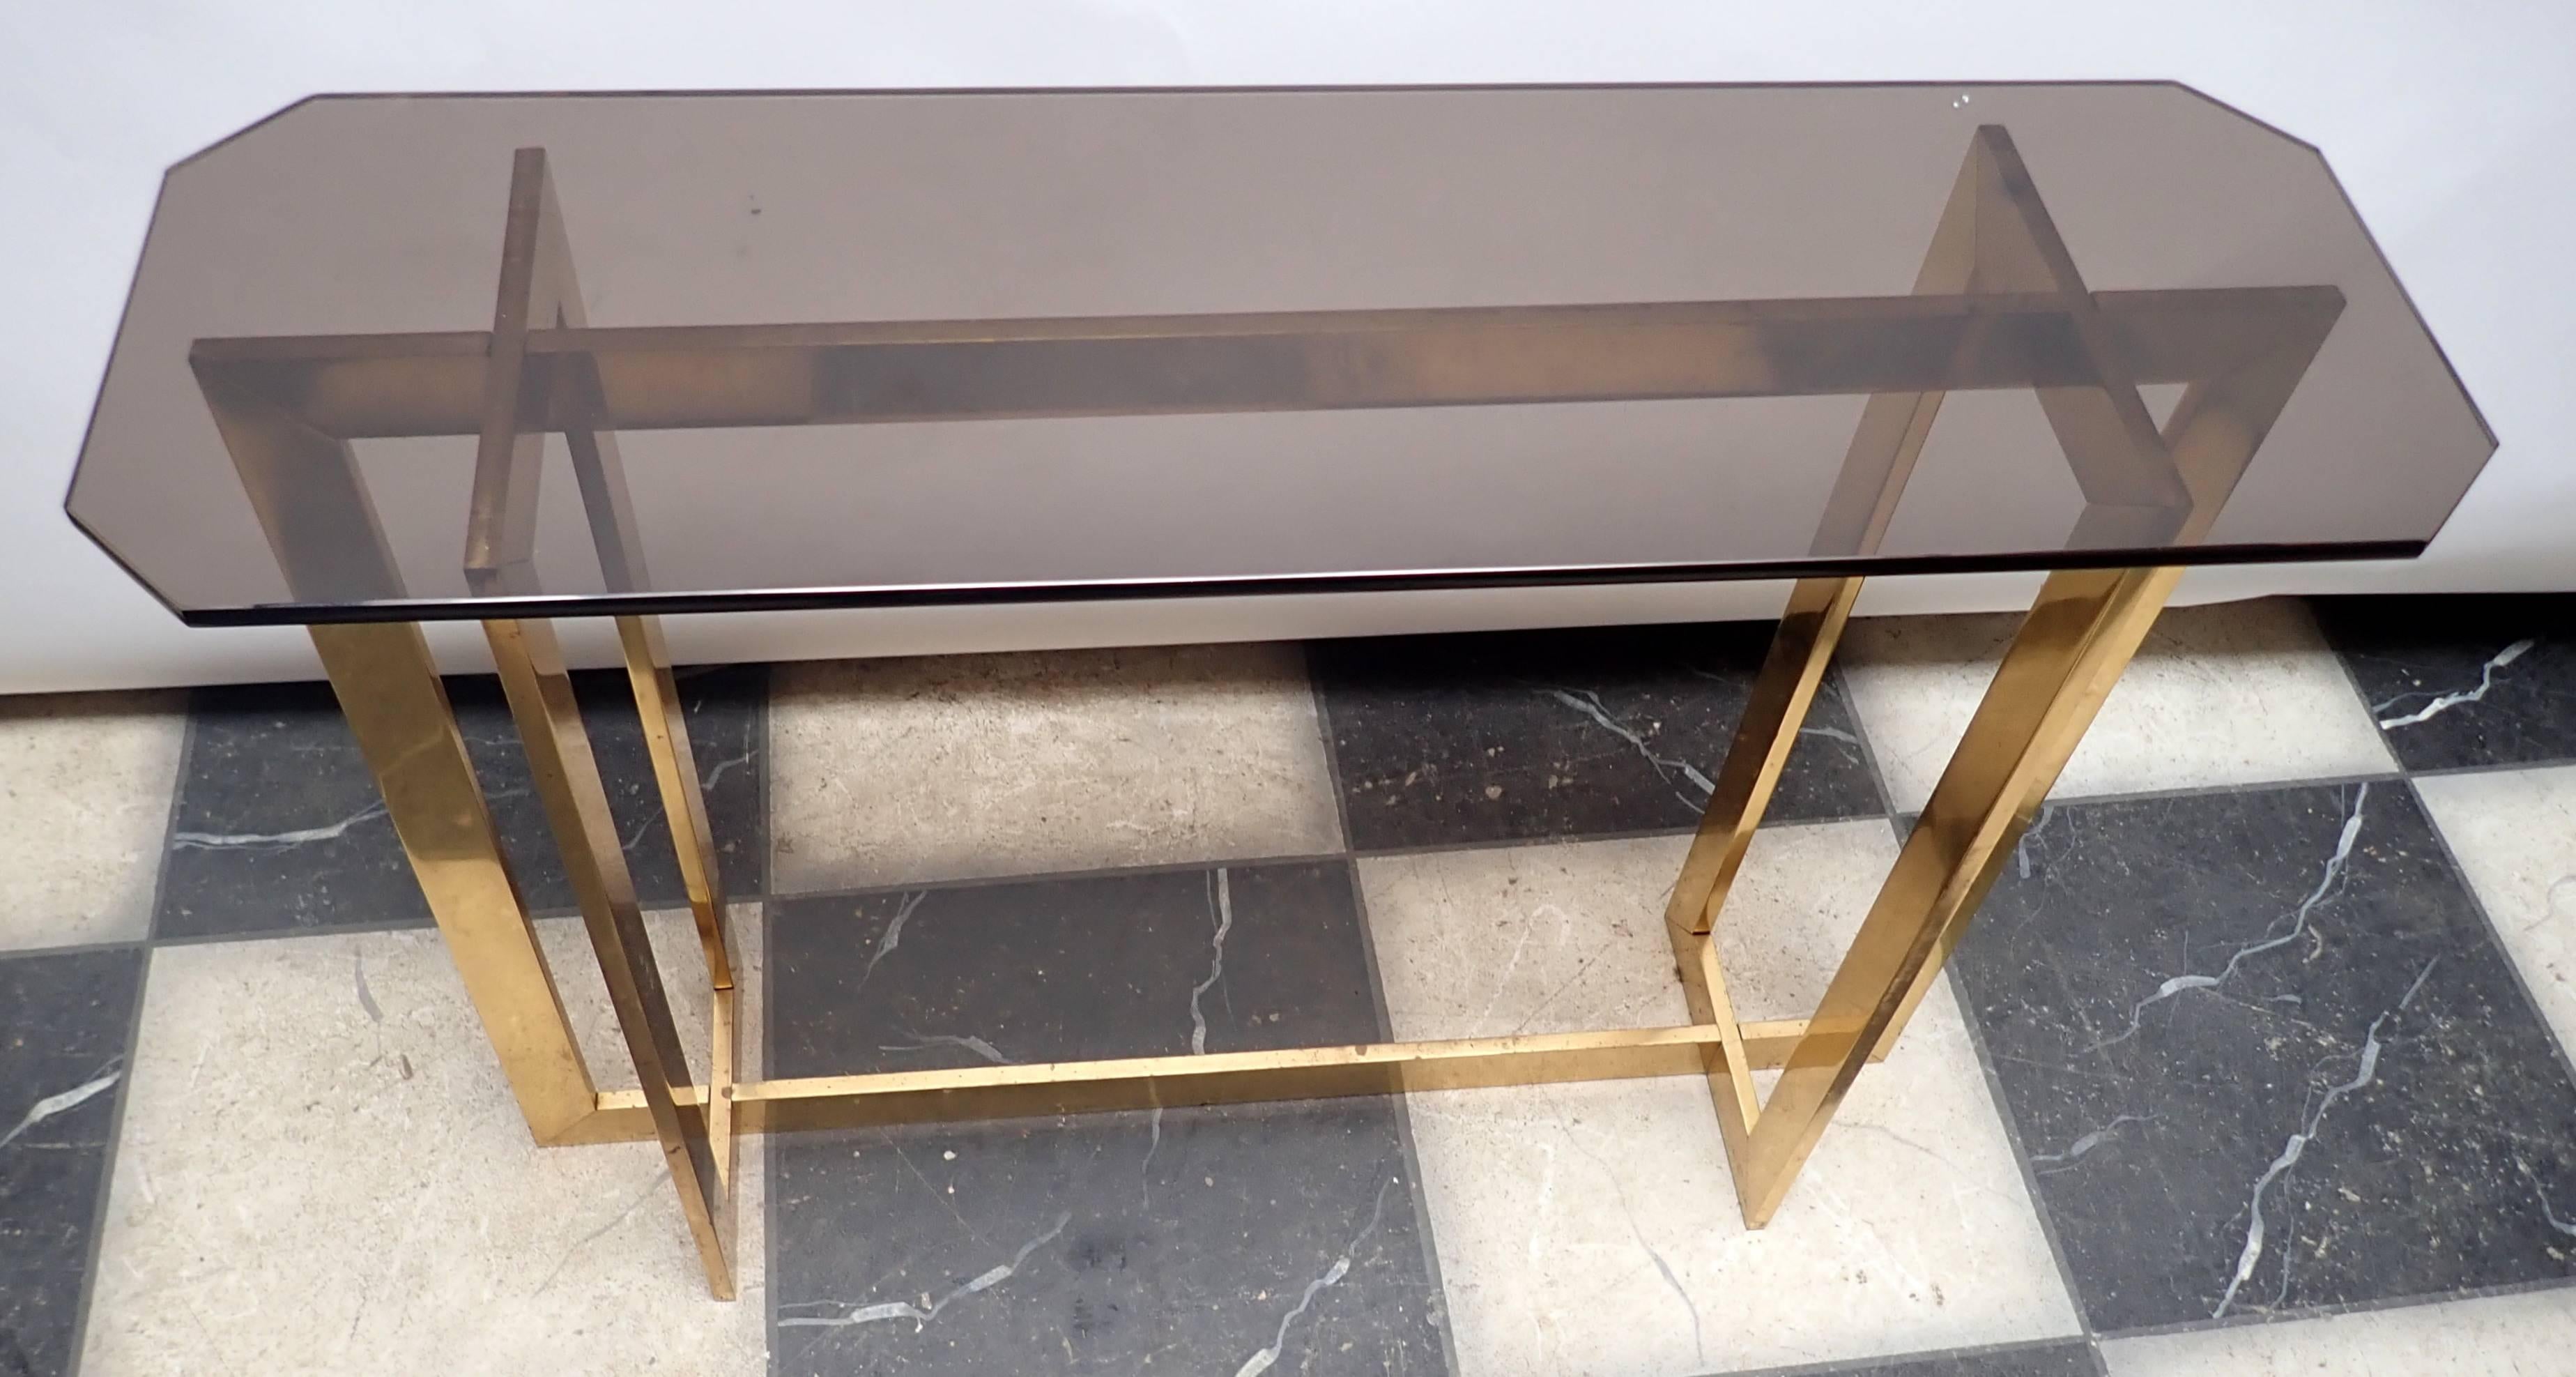 A wonderful vintage Mid-Century Modern brass / bronze geometric transitional base with smoke cut corner glass top console table very well made & sturdy, both the console and glass top are heavy.